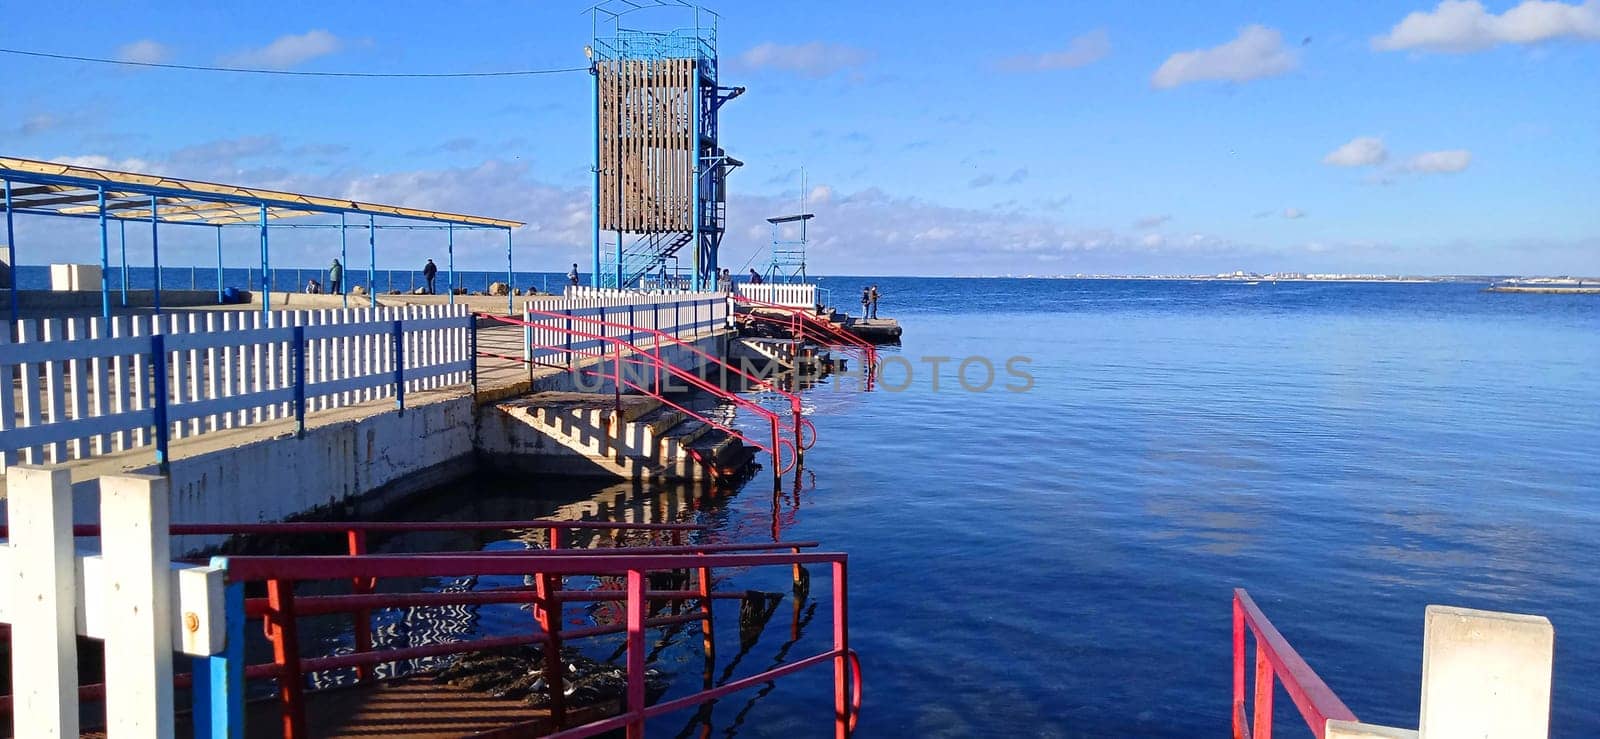 View of the sea and pier with lights at sunrise, blue sky without clouds